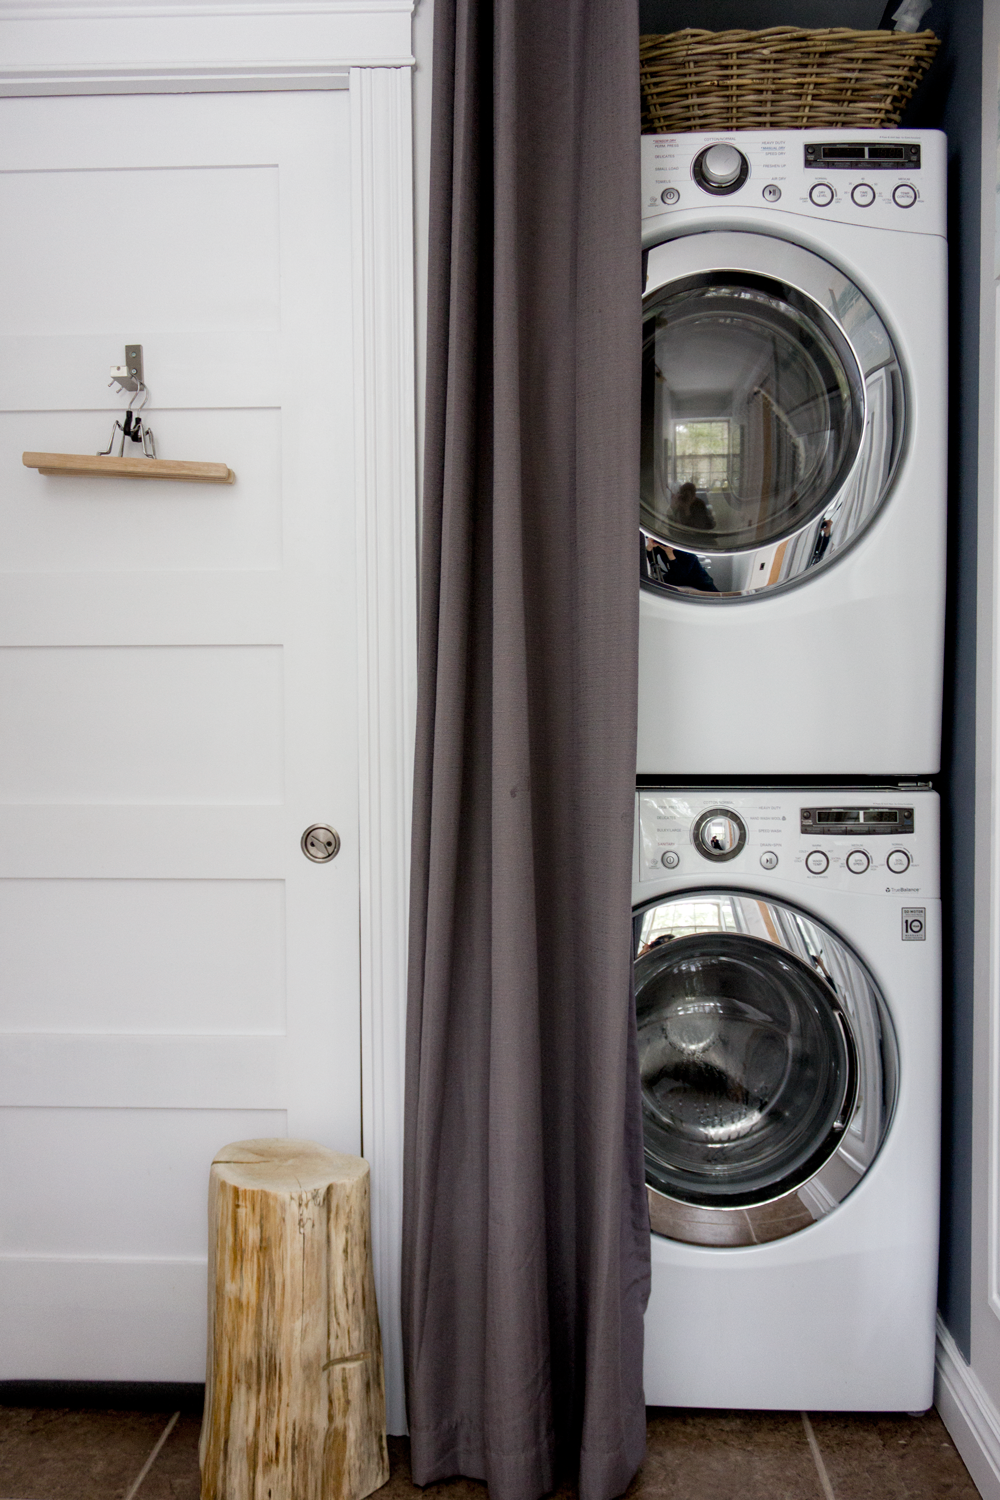 Modern Curtains To Hide Washer And Dryer for Simple Design